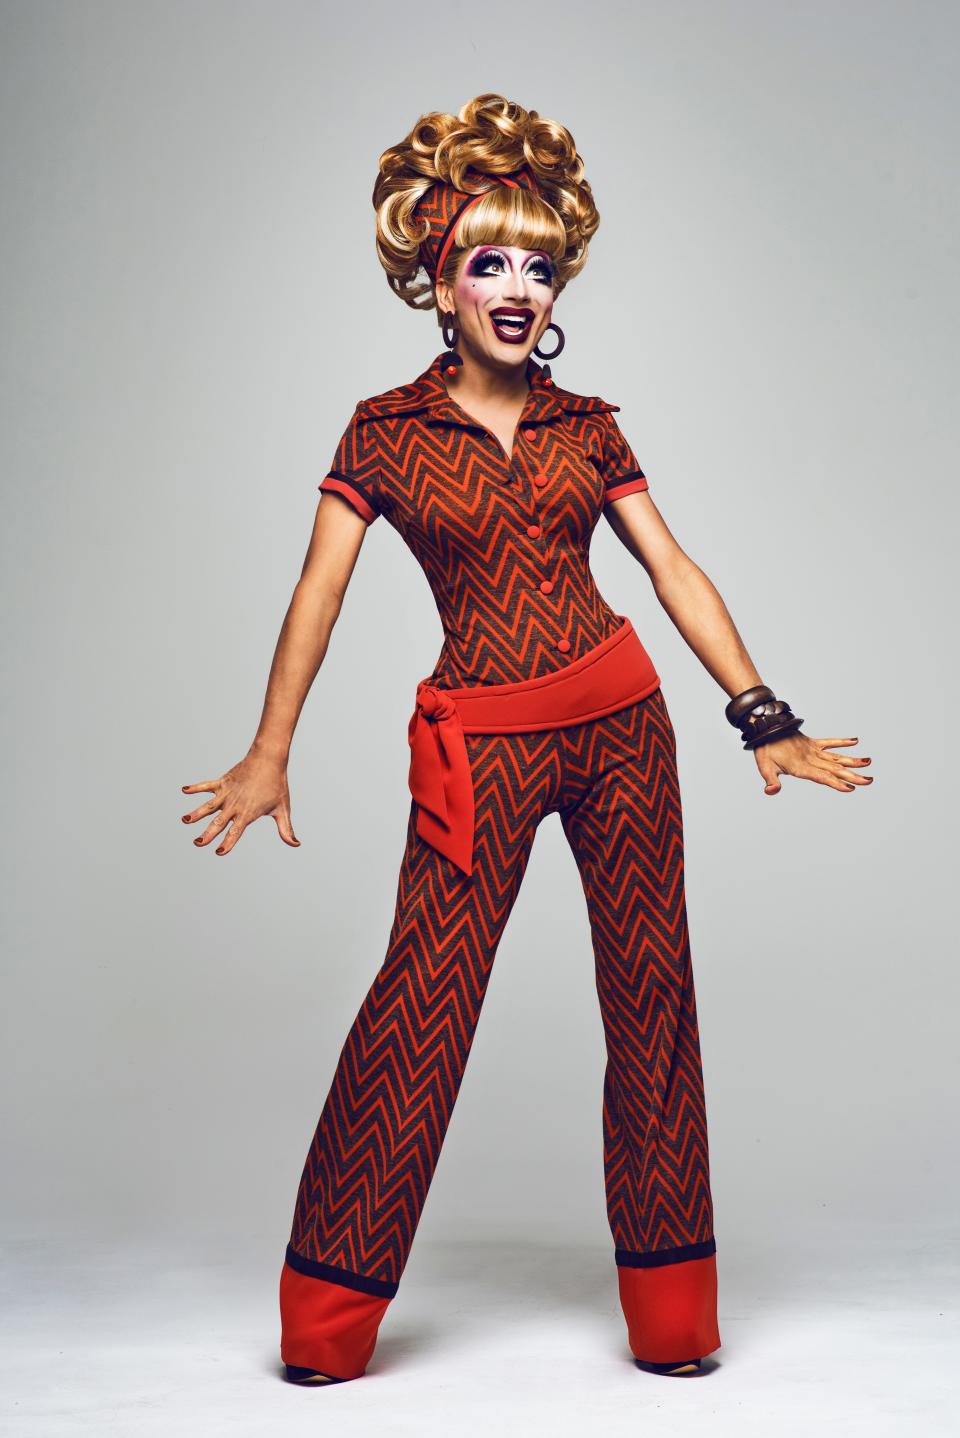 Bianca Del Rio performs at Provincetown Town Hall on Oct. 28.